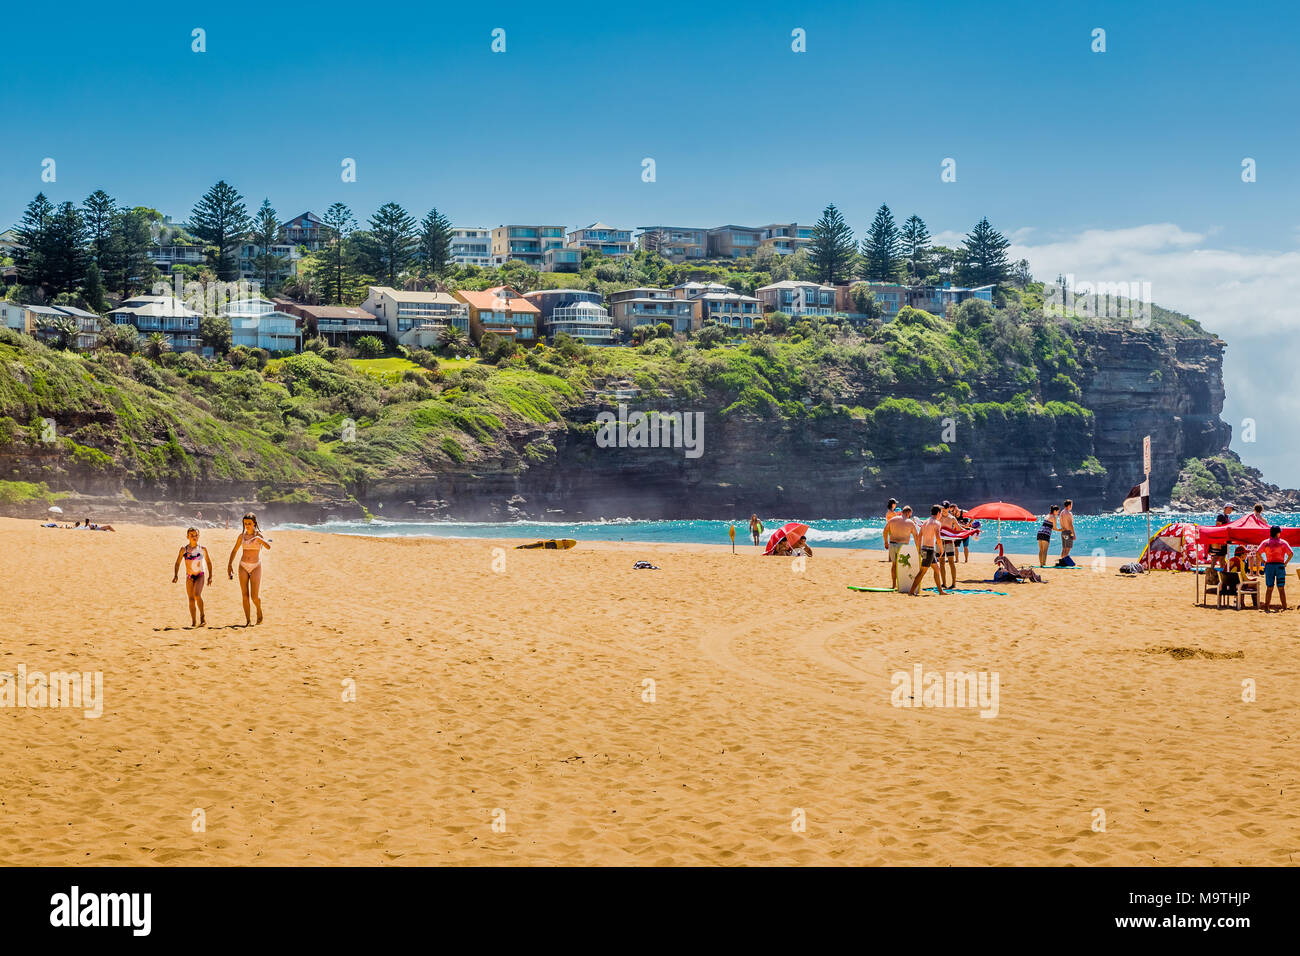 View of Bilgola beach, with the headland in the background, and people enjoying the sunshine. Stock Photo